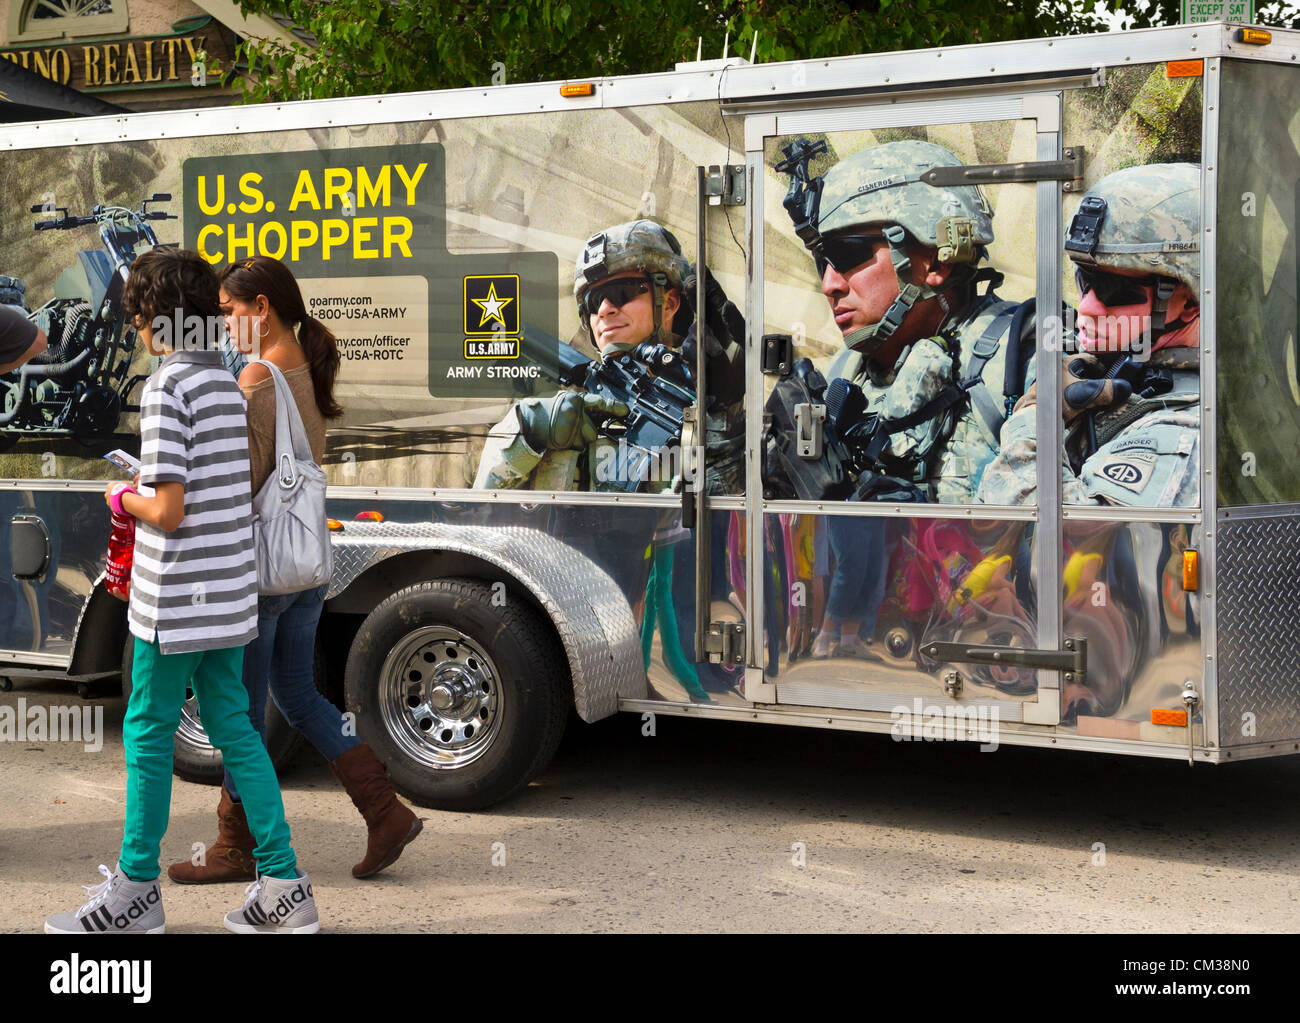 Sept. 22, 2012 - Bellmore, New York U.S. - At the Military Expo section of the 26th Annual Bellmore Family Street Festival, a woman and boy walk by truck with 'U.S. Army Chopper' (motorcycle) written on it, and scene of several soldiers, at Long Island fair. Stock Photo